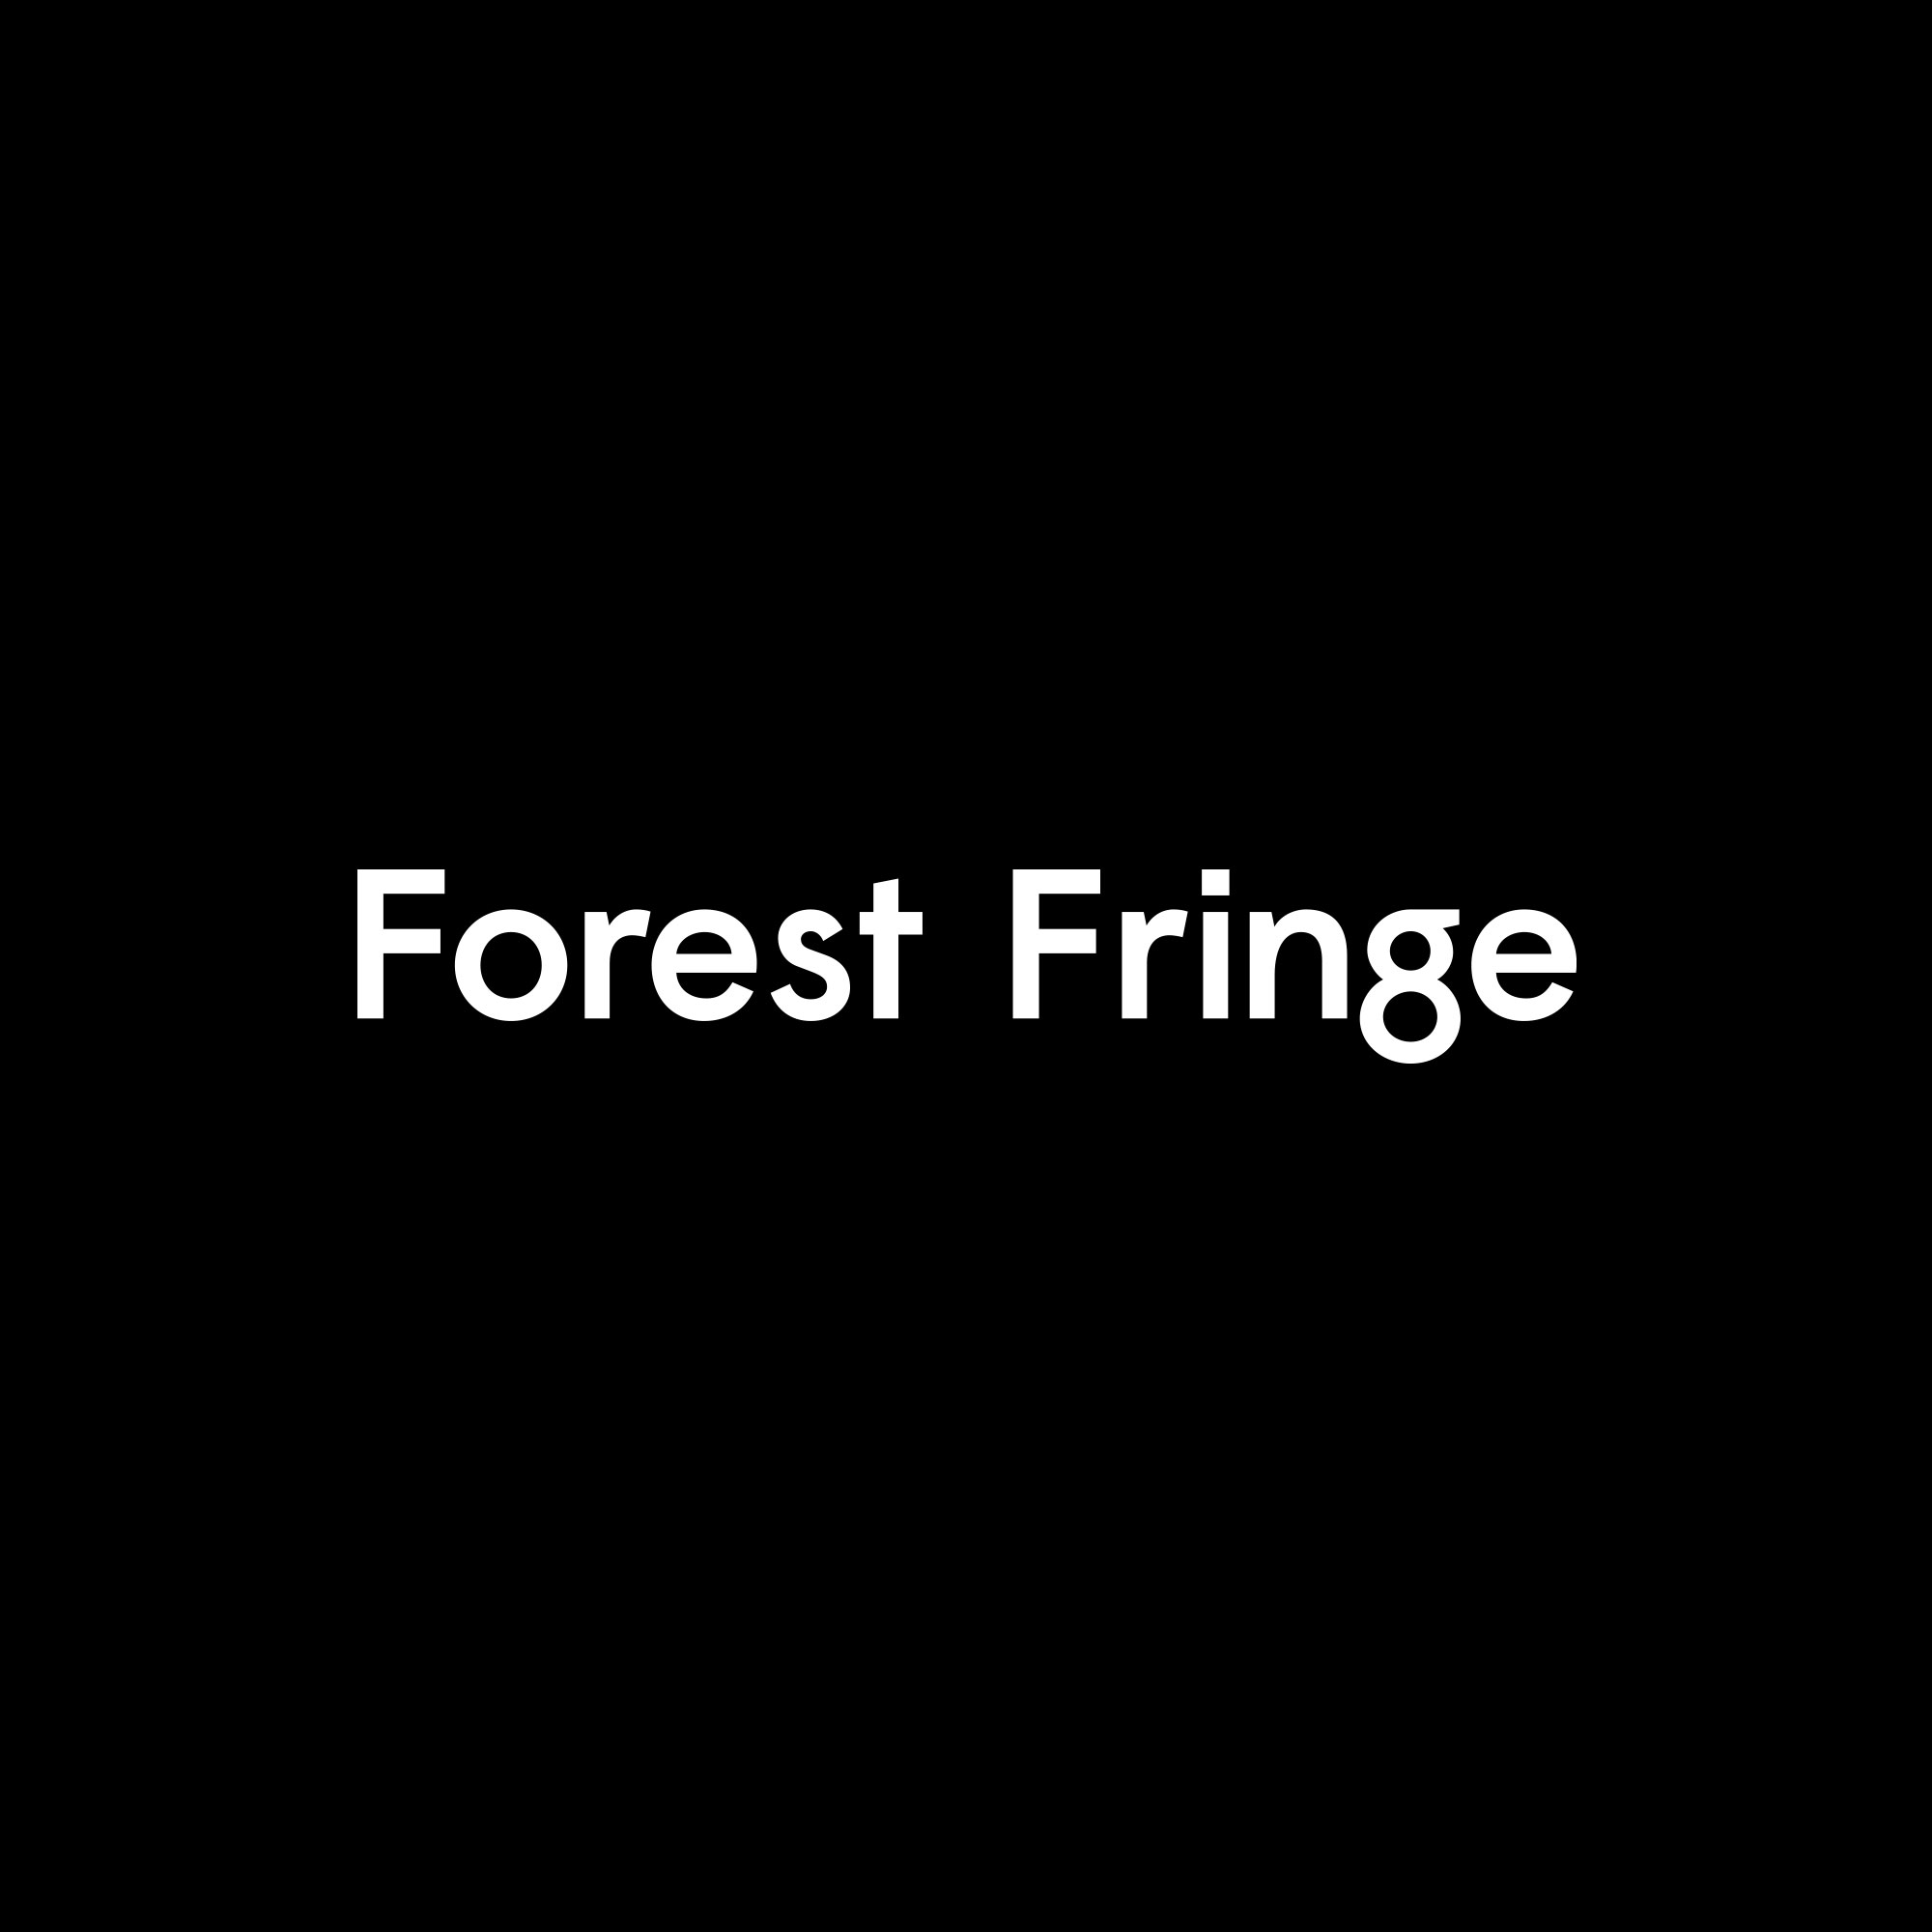 Forest-Fringe_ID_Text